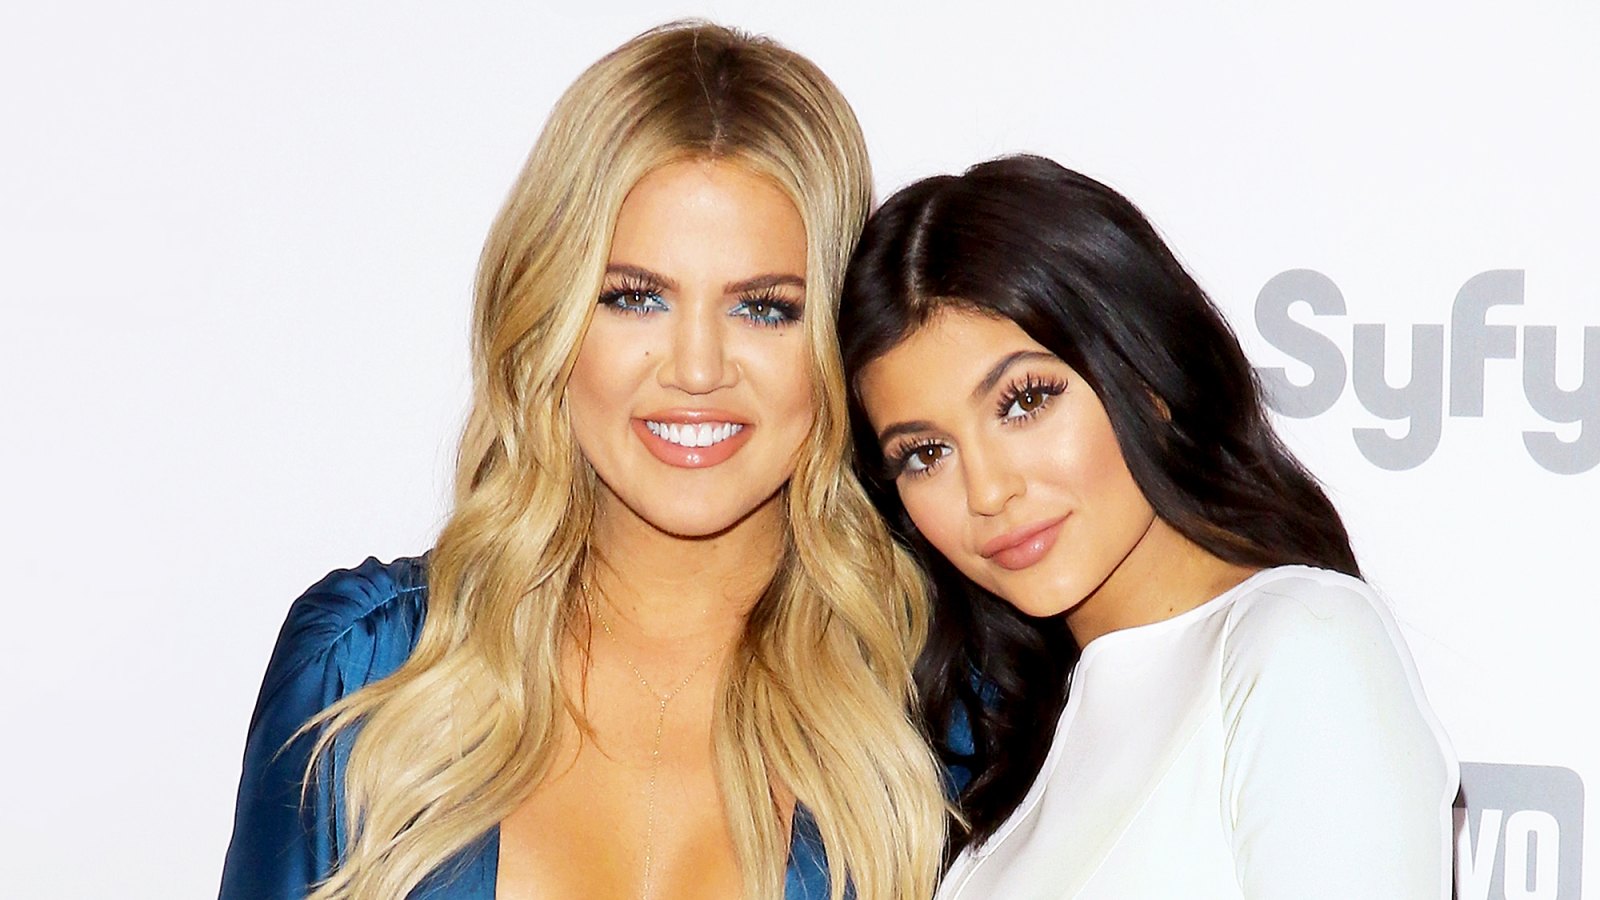 Khloe Kardashian and Kylie Jenner attend the 2015 NBCUniversal Cable Entertainment Upfront at The Jacob K. Javits Convention Center in New York City.